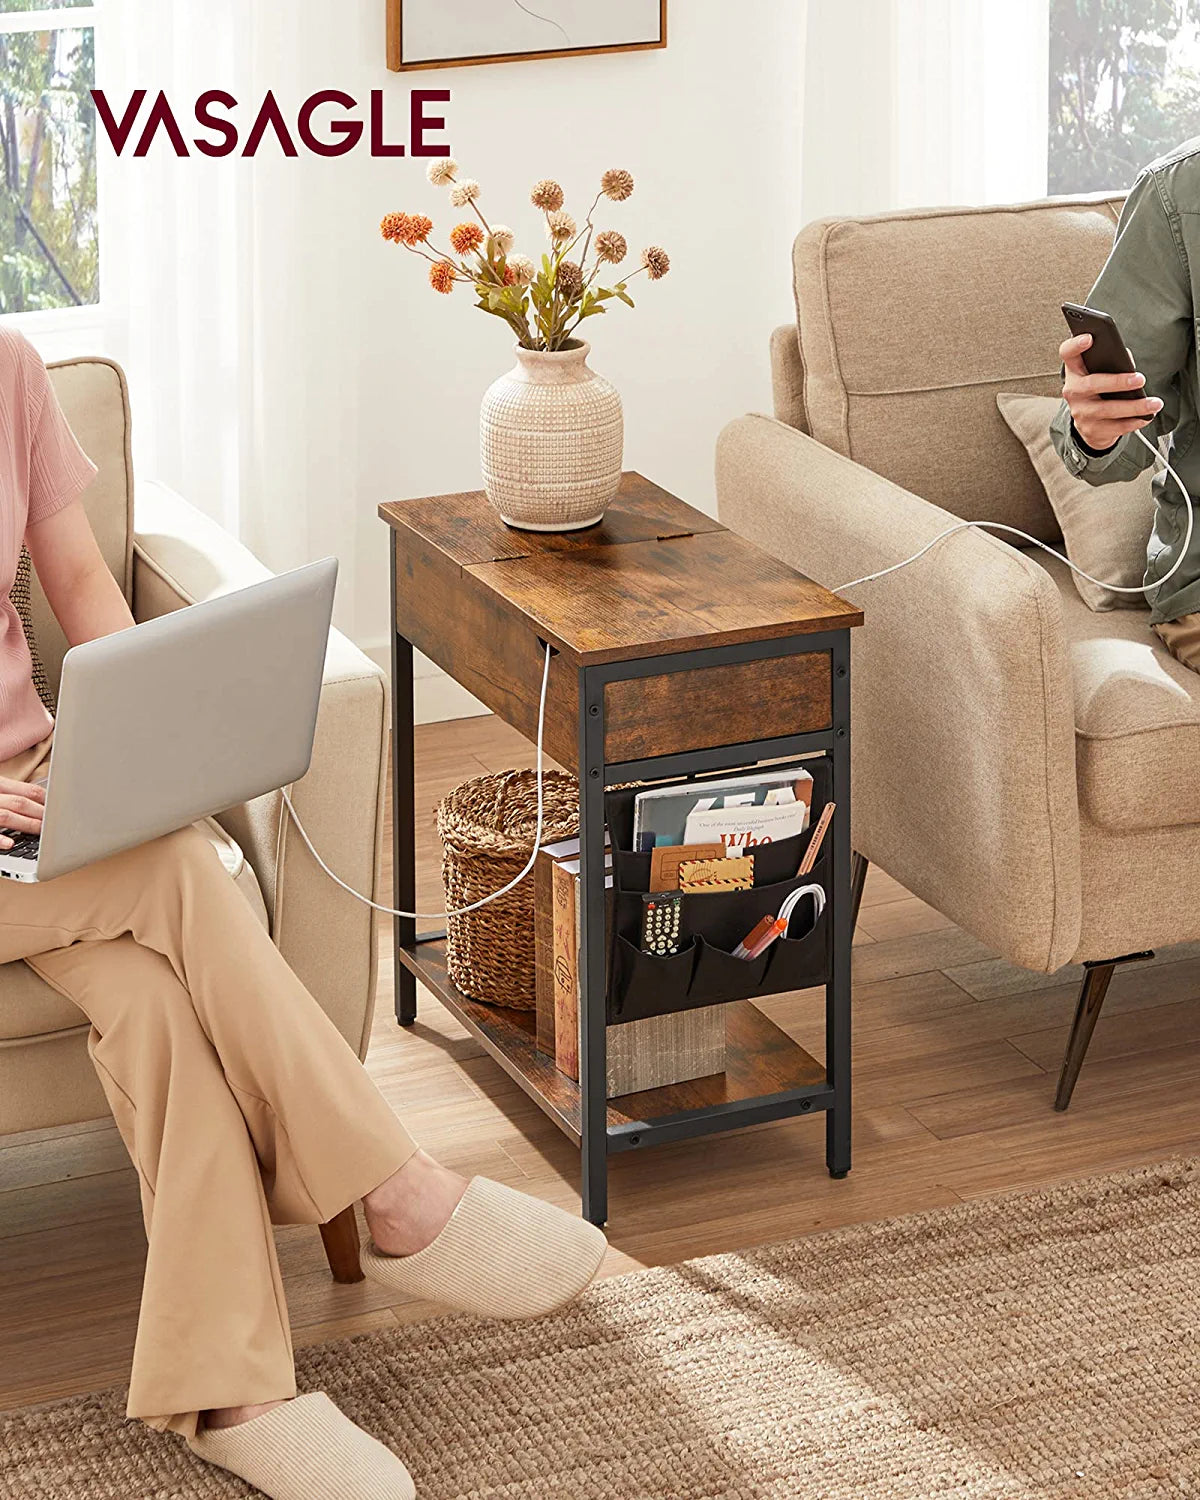 Side Table Folding Bedside Table with Sockets Folding Table Top with Shelf and Fabric Bag for Living Room Bedroom